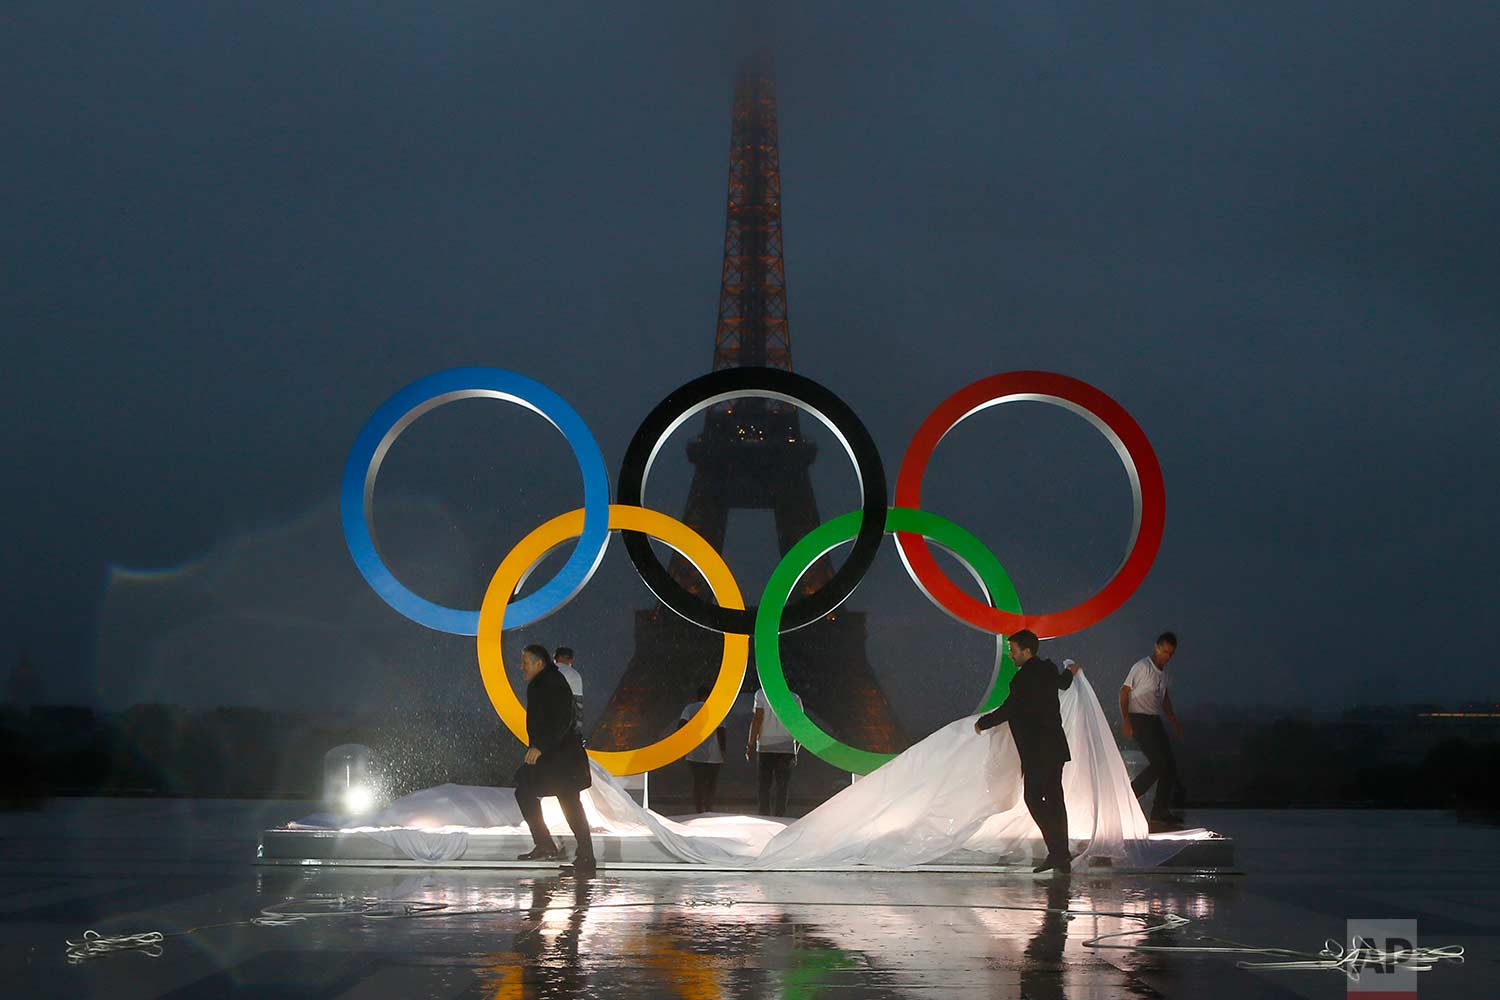  In this Wednesday, Sept. 13, 2017 photo, Paris officials unveil a display of the Olympic rings on Trocadero plaza that overlooks the Eiffel Tower, after the vote in Lima, Peru, awarding the 2024 Games to the French capital, in Paris, France. Paris w